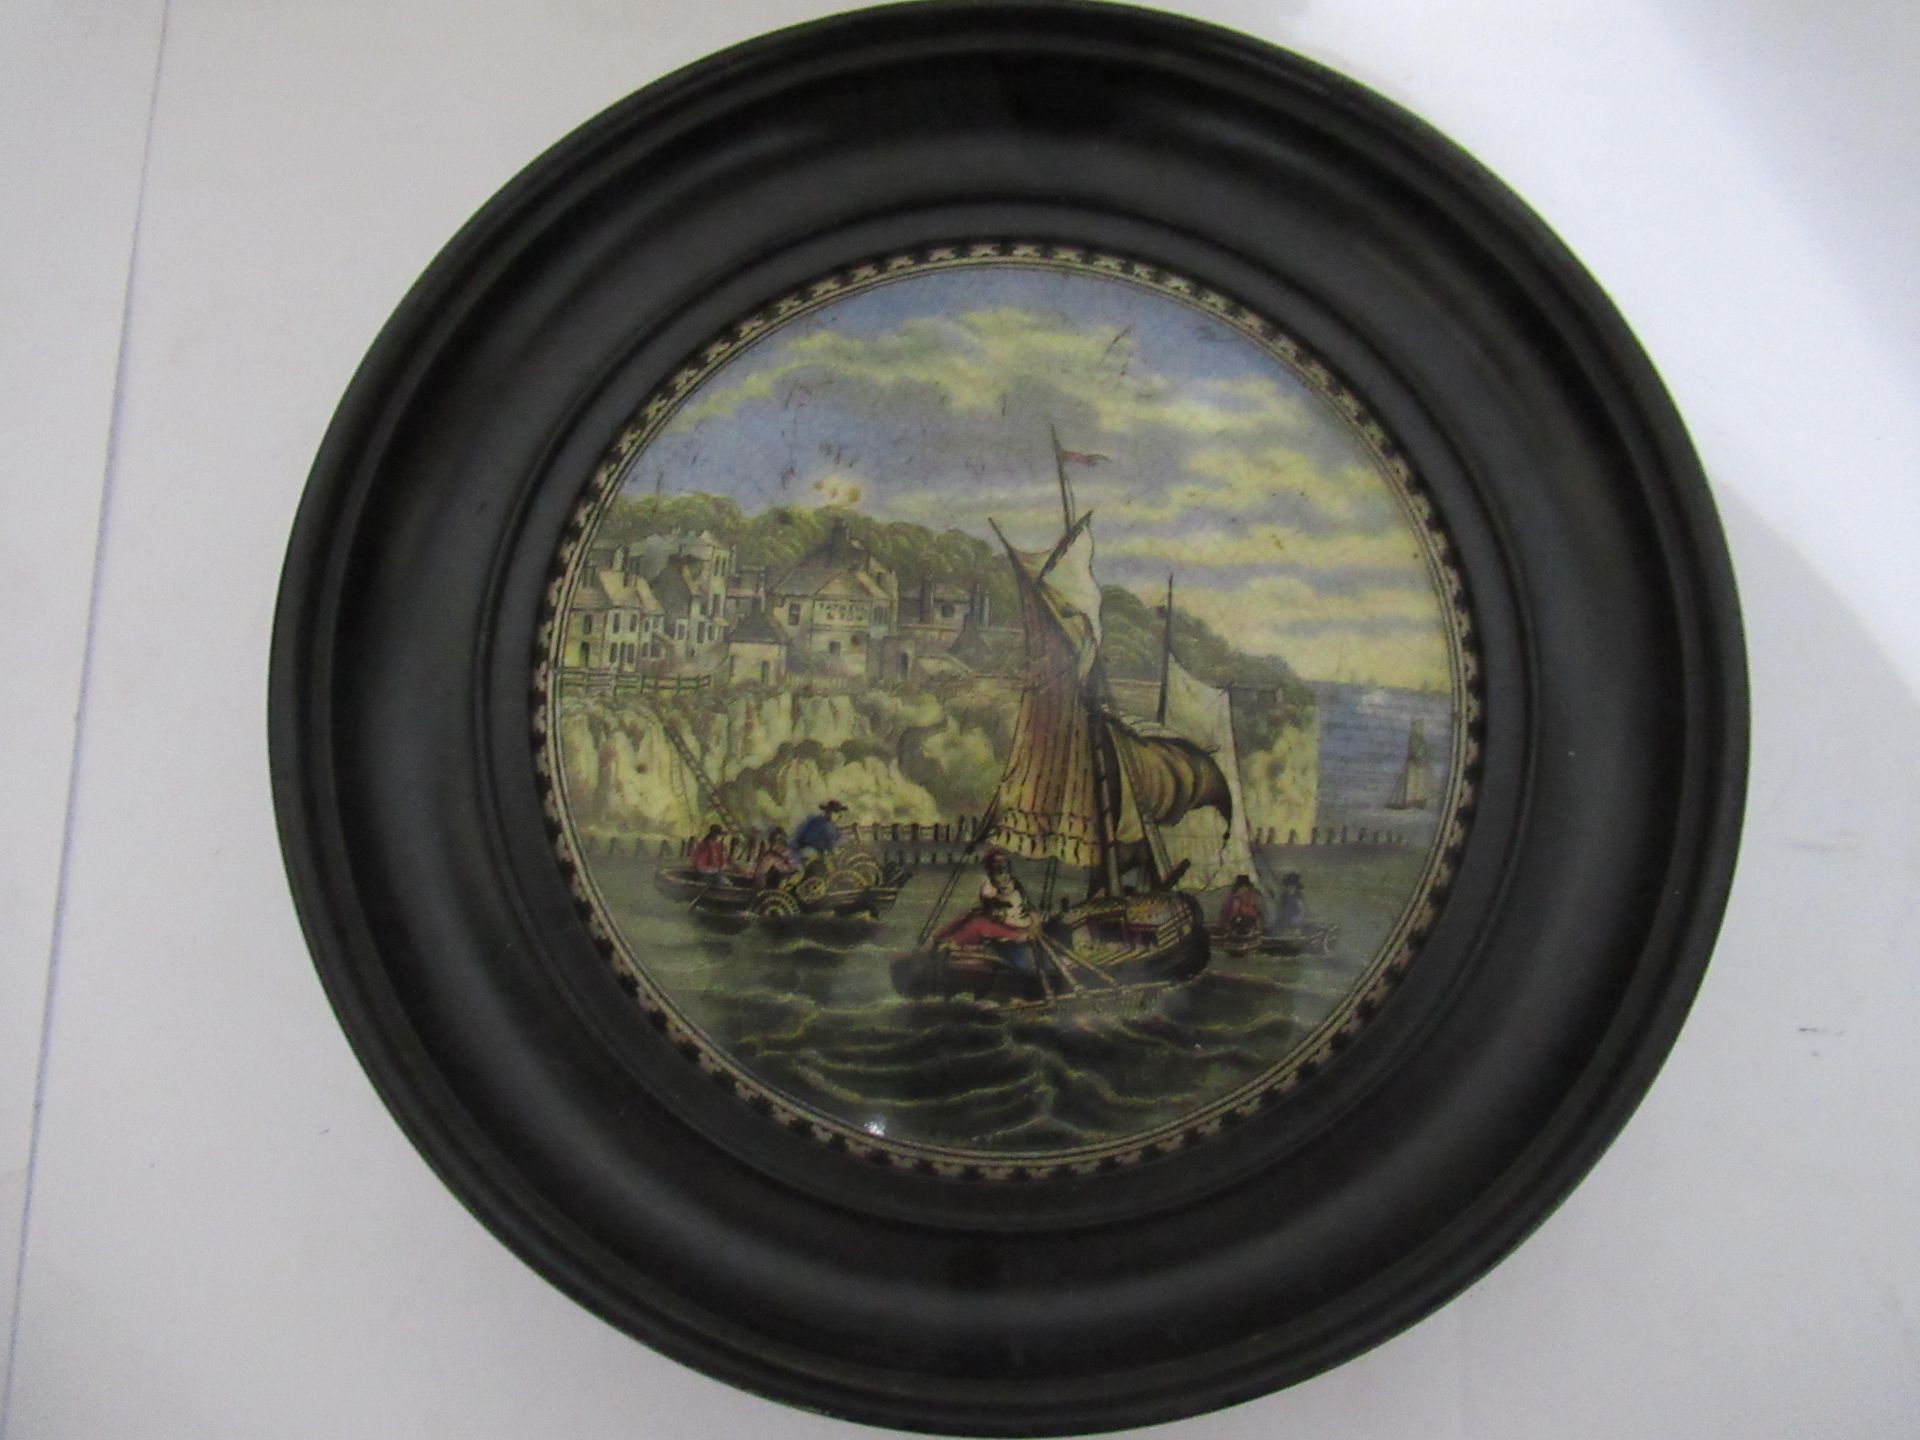 6x Prattware ceramic lids in wooden mounts including 'Pegwell Bay', 'Rifle Contest Wimbledon 1868', - Image 2 of 16